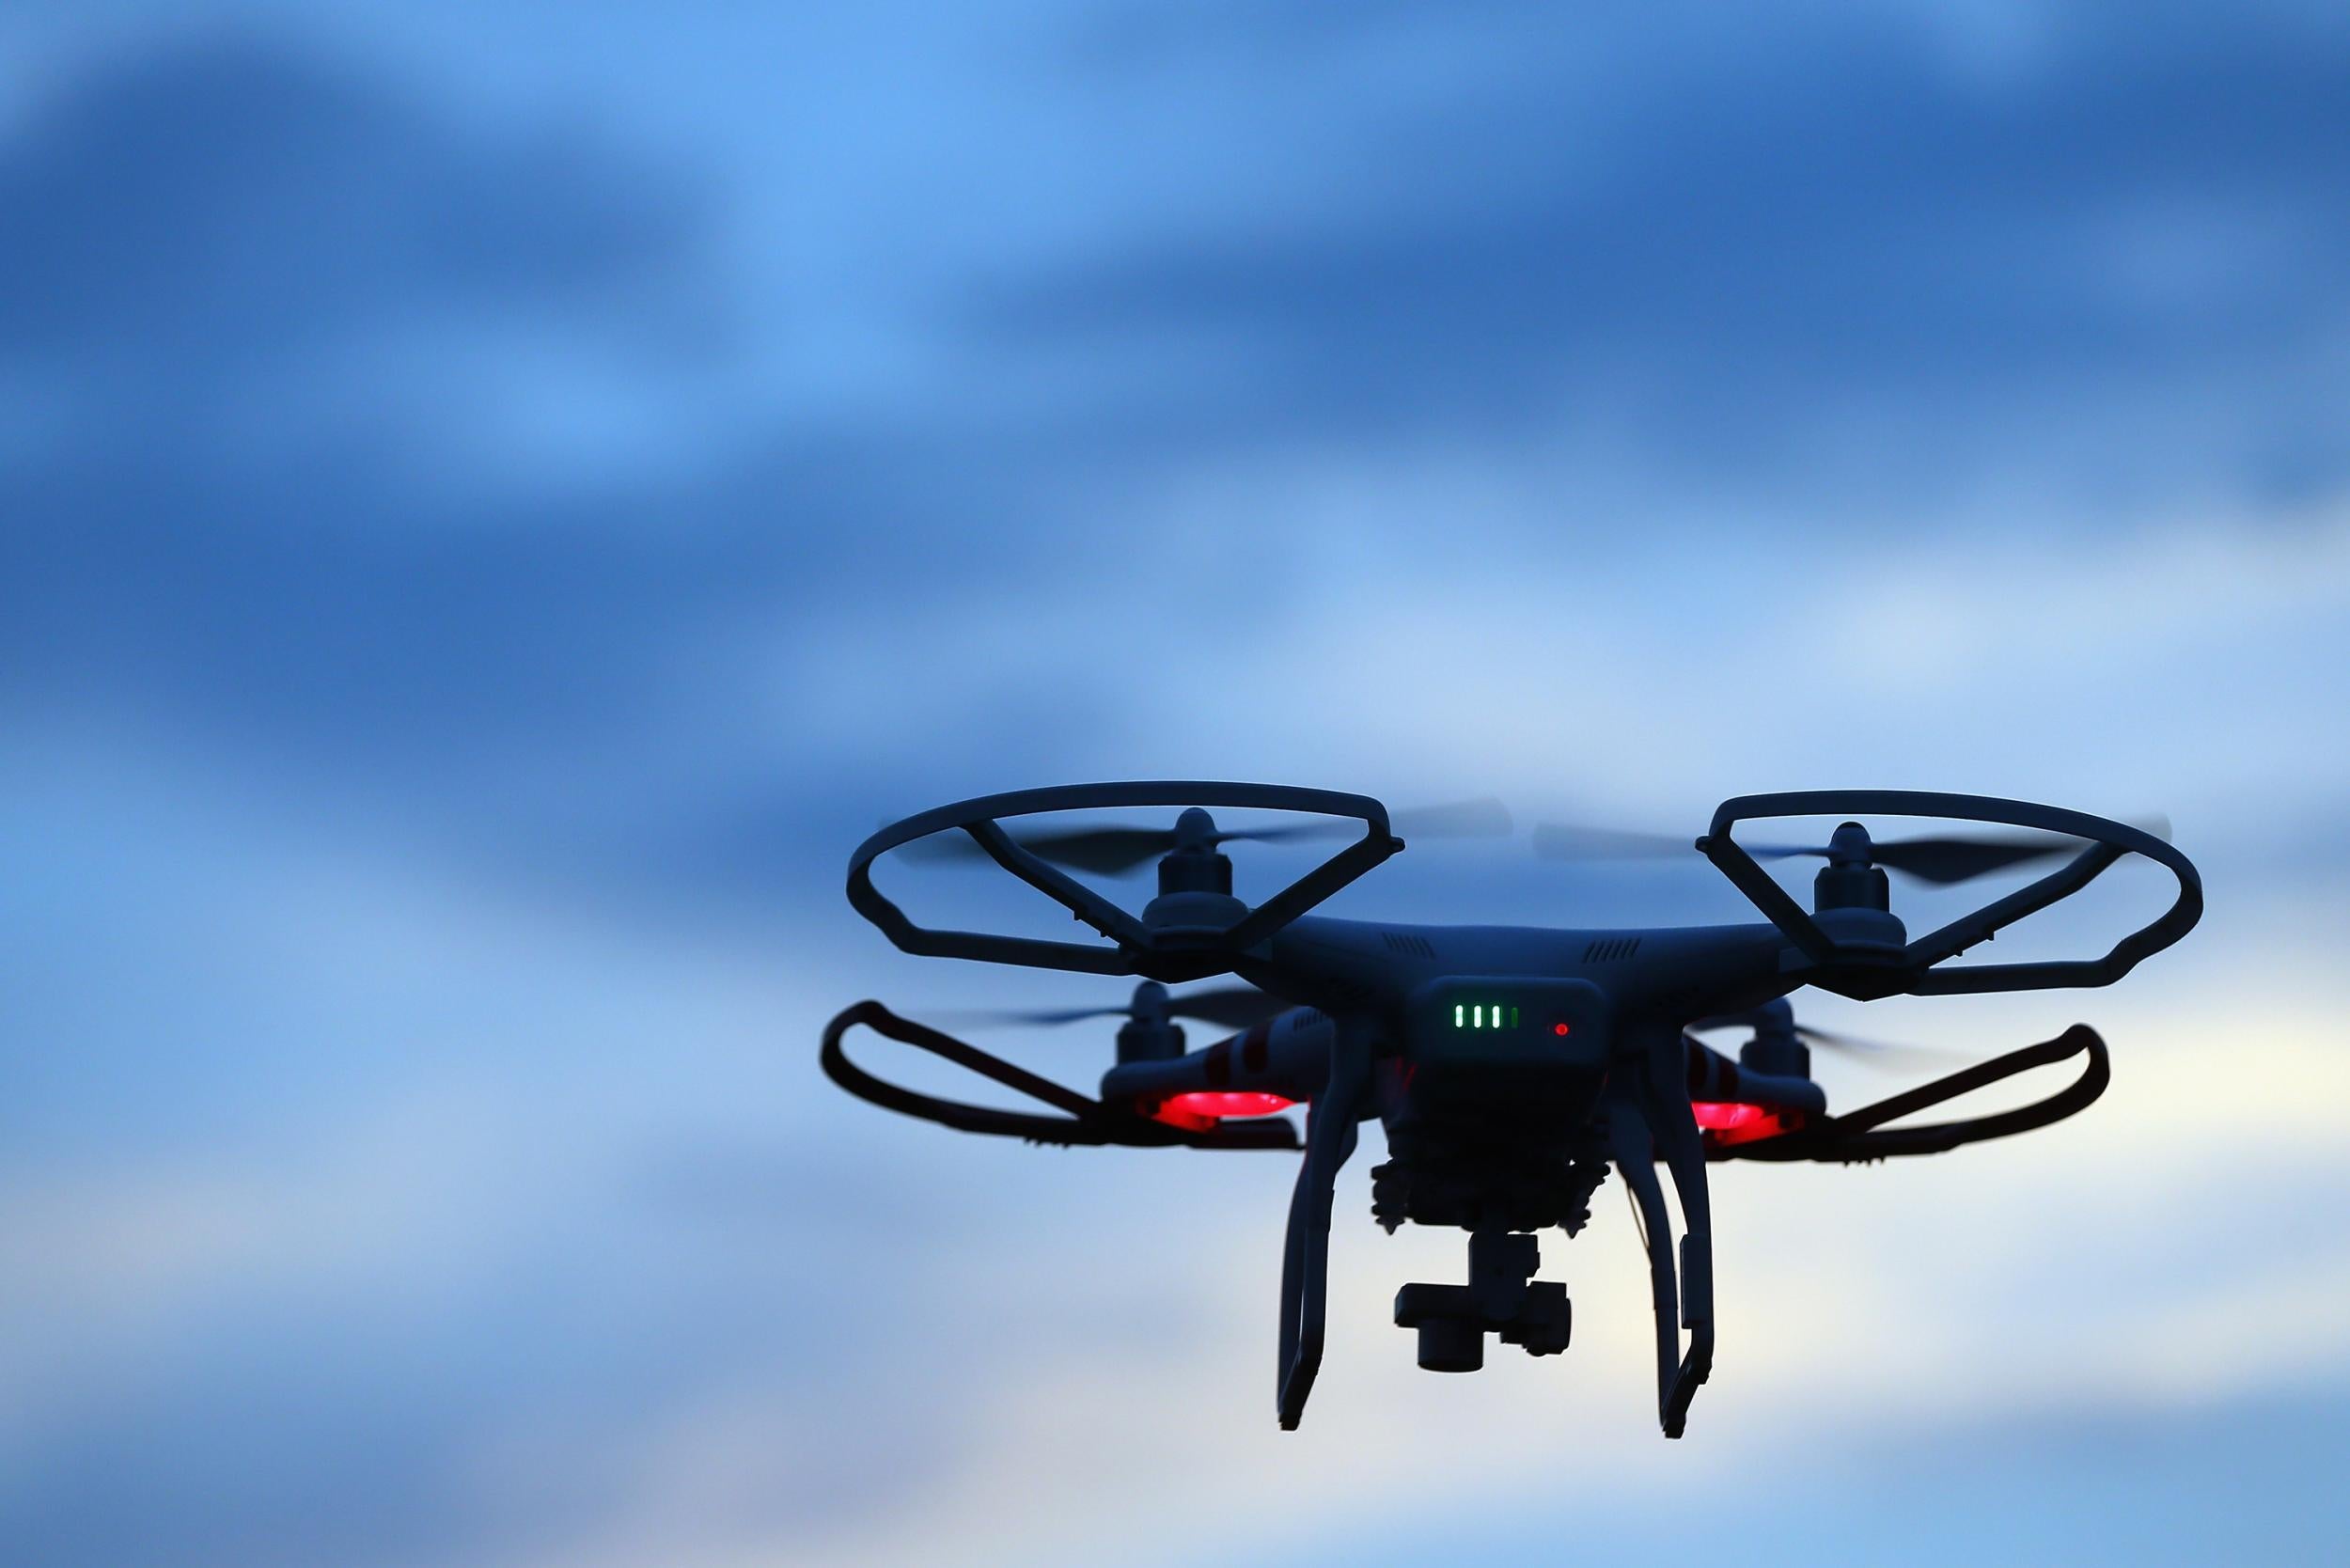 A drone (which will soon have to be registered) flies above New York